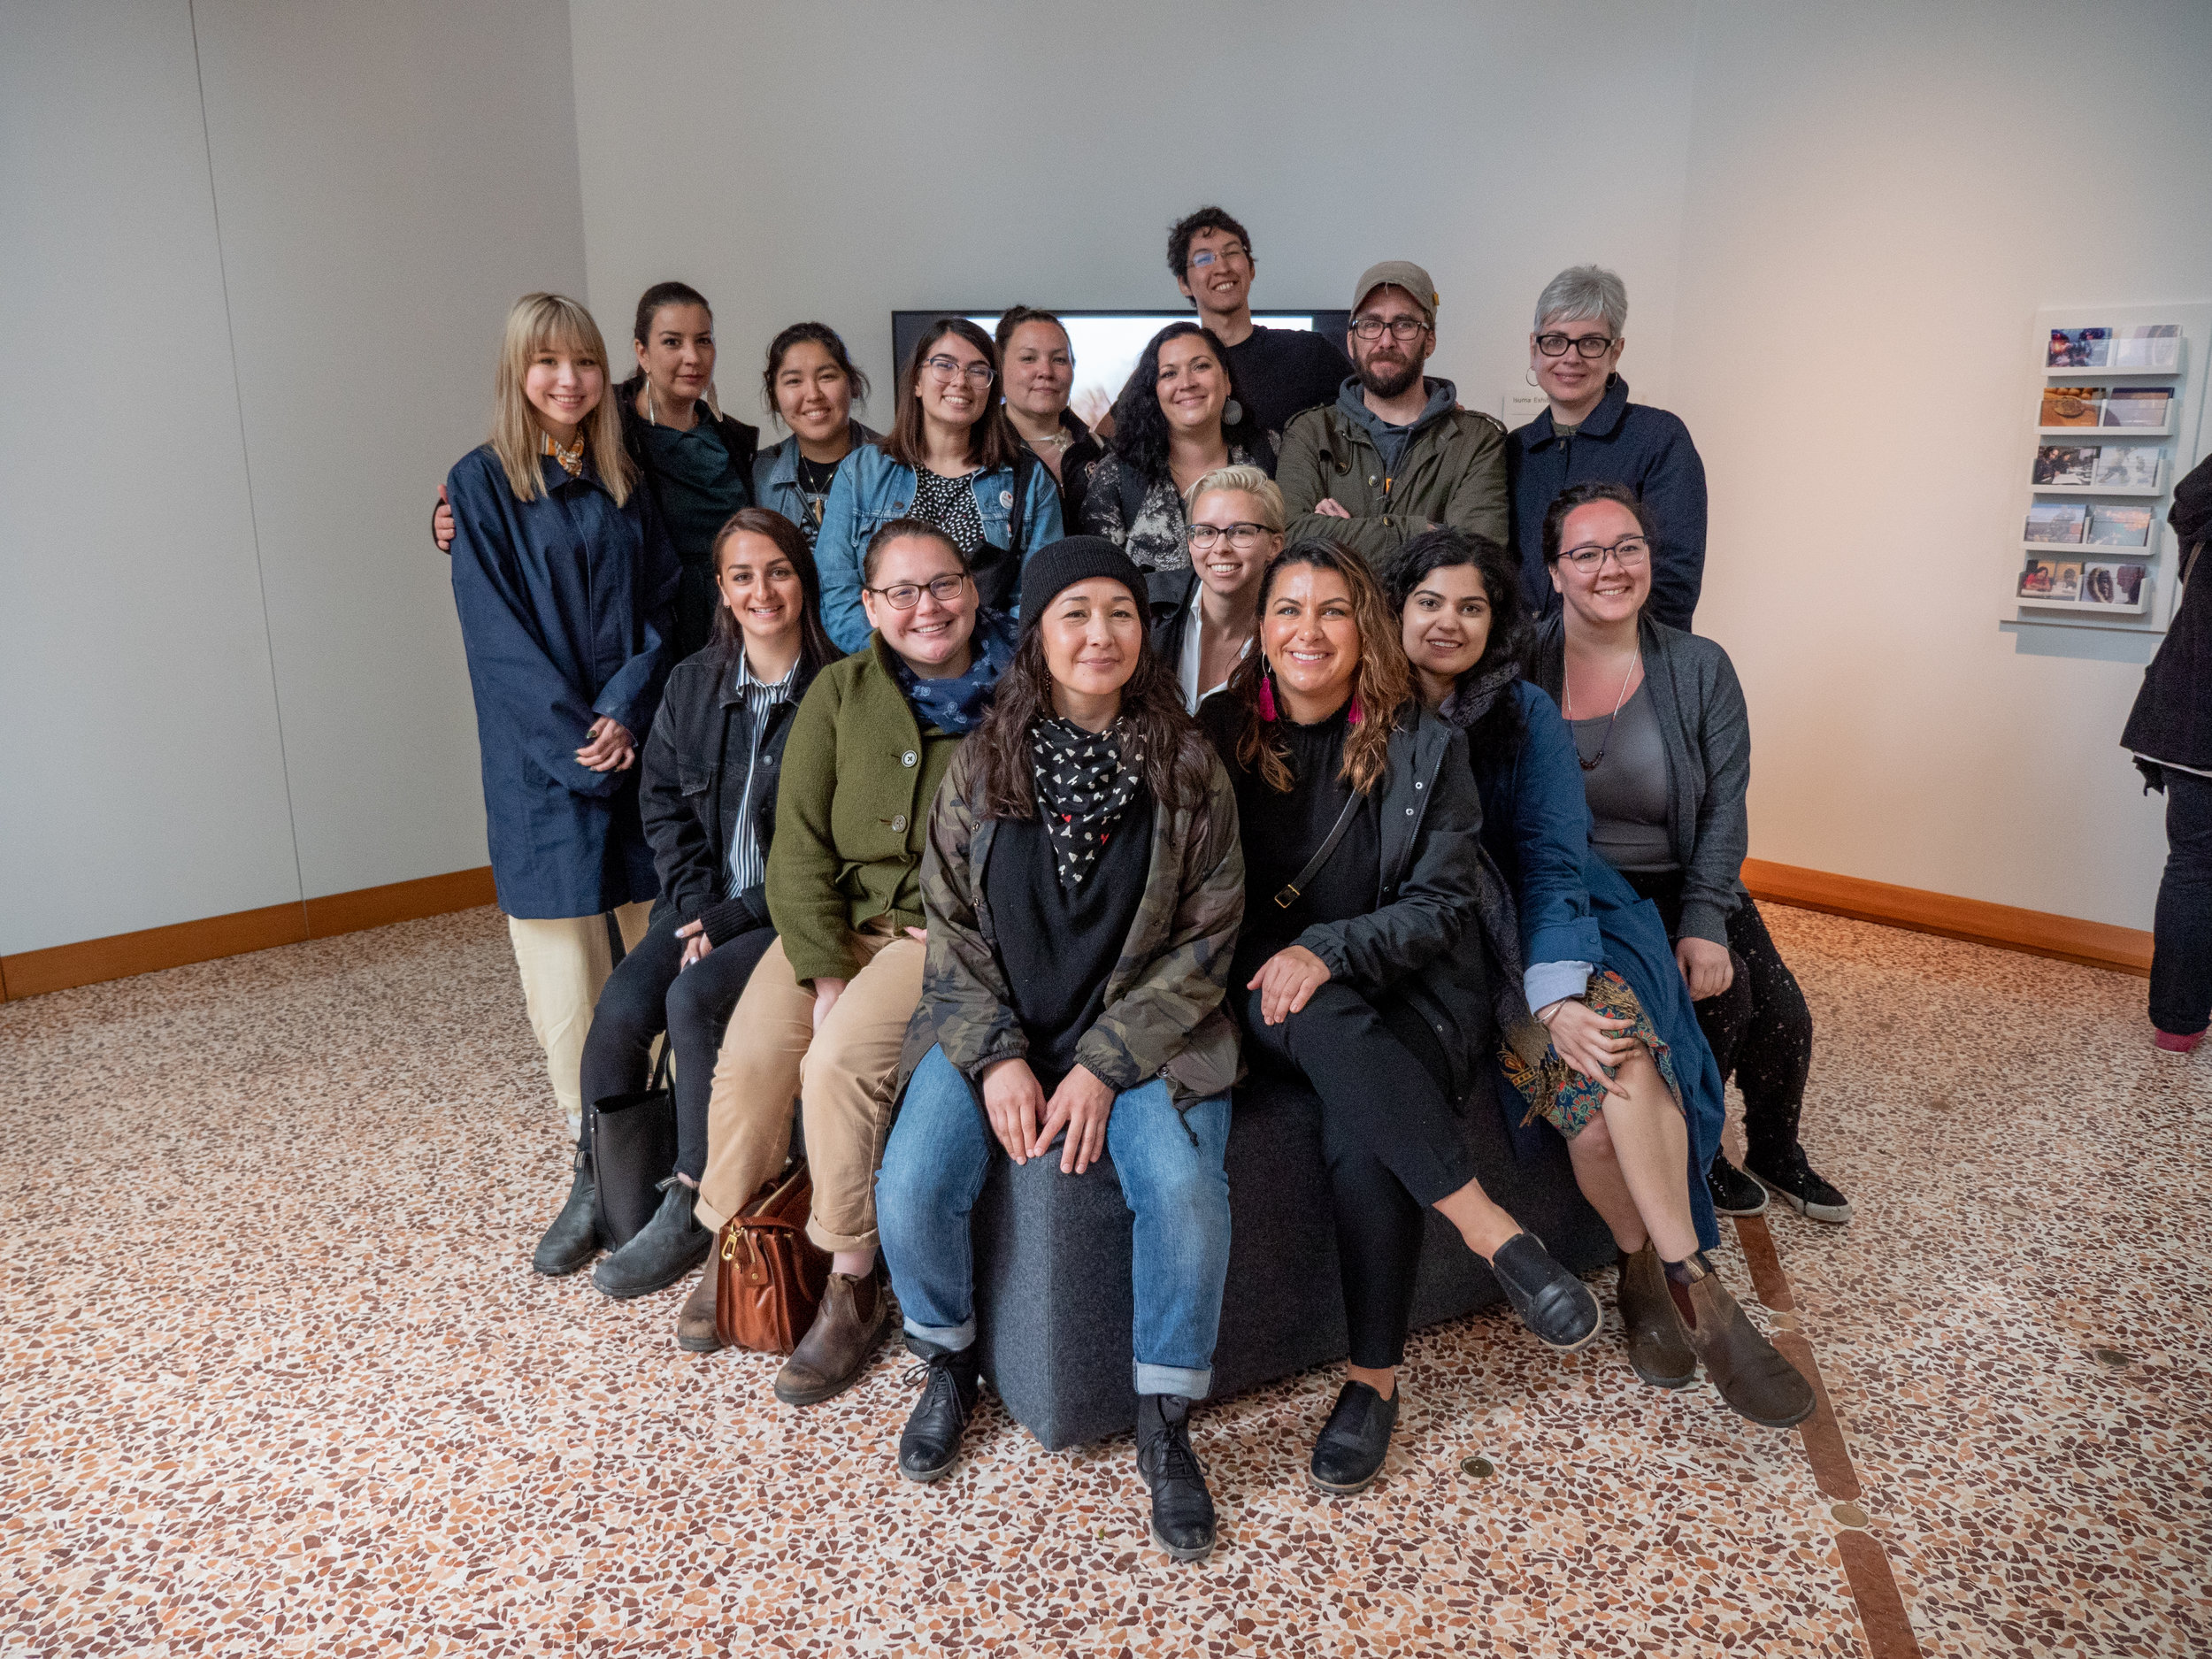  Inuit Futures first-year cohort at the Summer Institute in Venice, May 2019. Photo by Tom McLeod. 